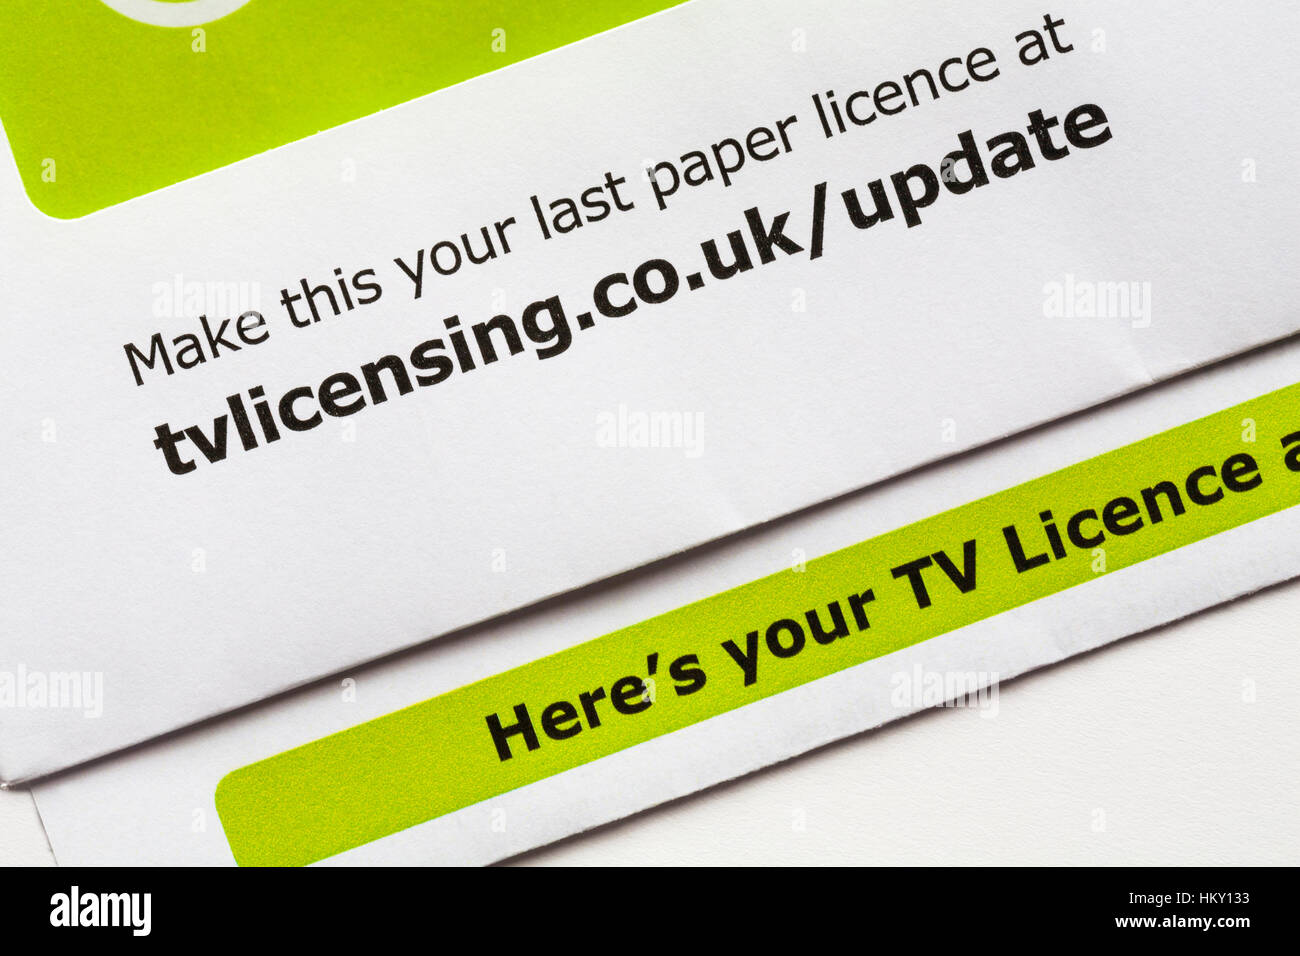 Make this your last paper license at tvlicensing - details on correspondence about TV license Stock Photo